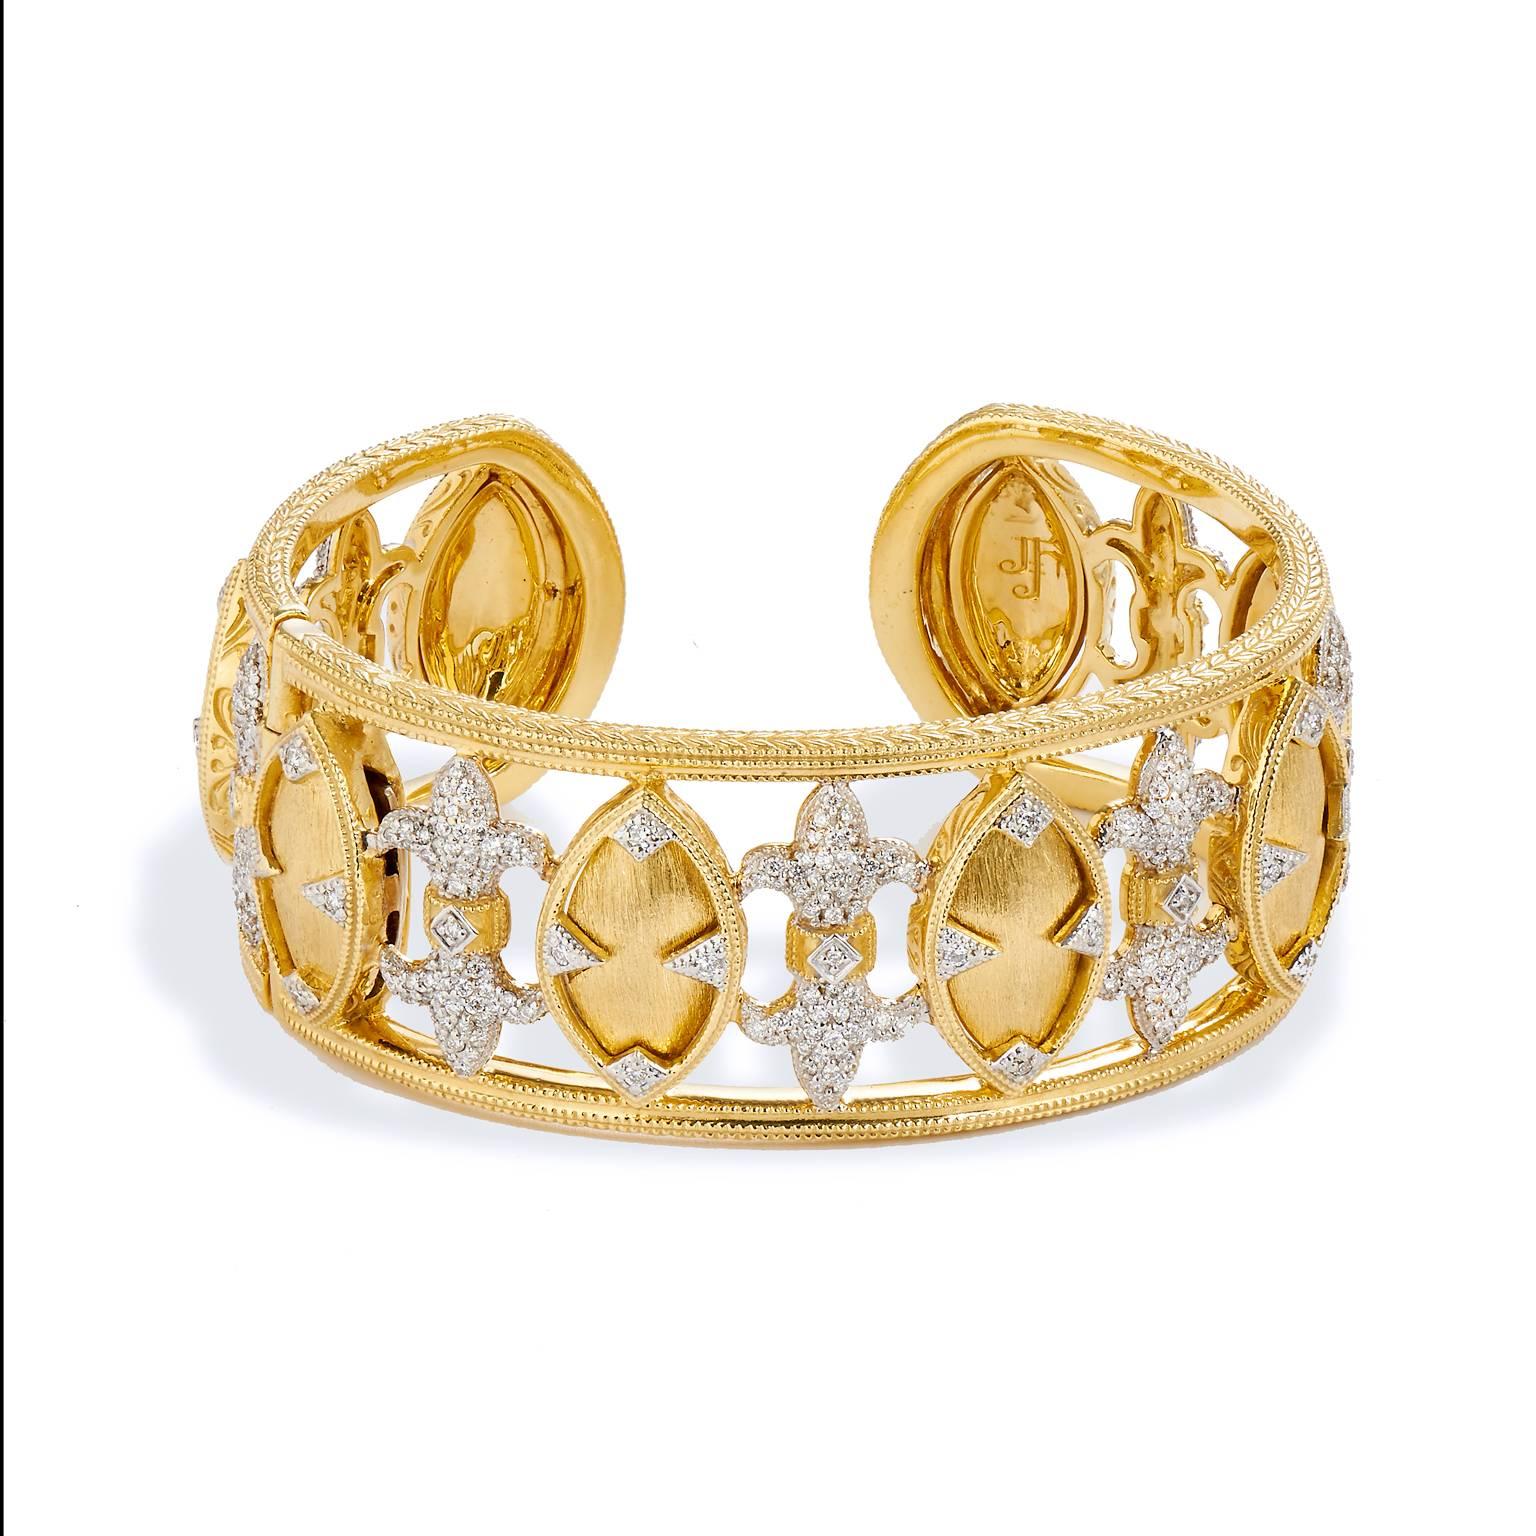 Combining classic elegance with on trend shapes and styles, Jude Frances Jewelry, is a much desired designer. This bracelet features a beautifully feminine Marquis Fleur Cuff design crafted in 18kt yellow gold and 2.28ct of diamond pave.